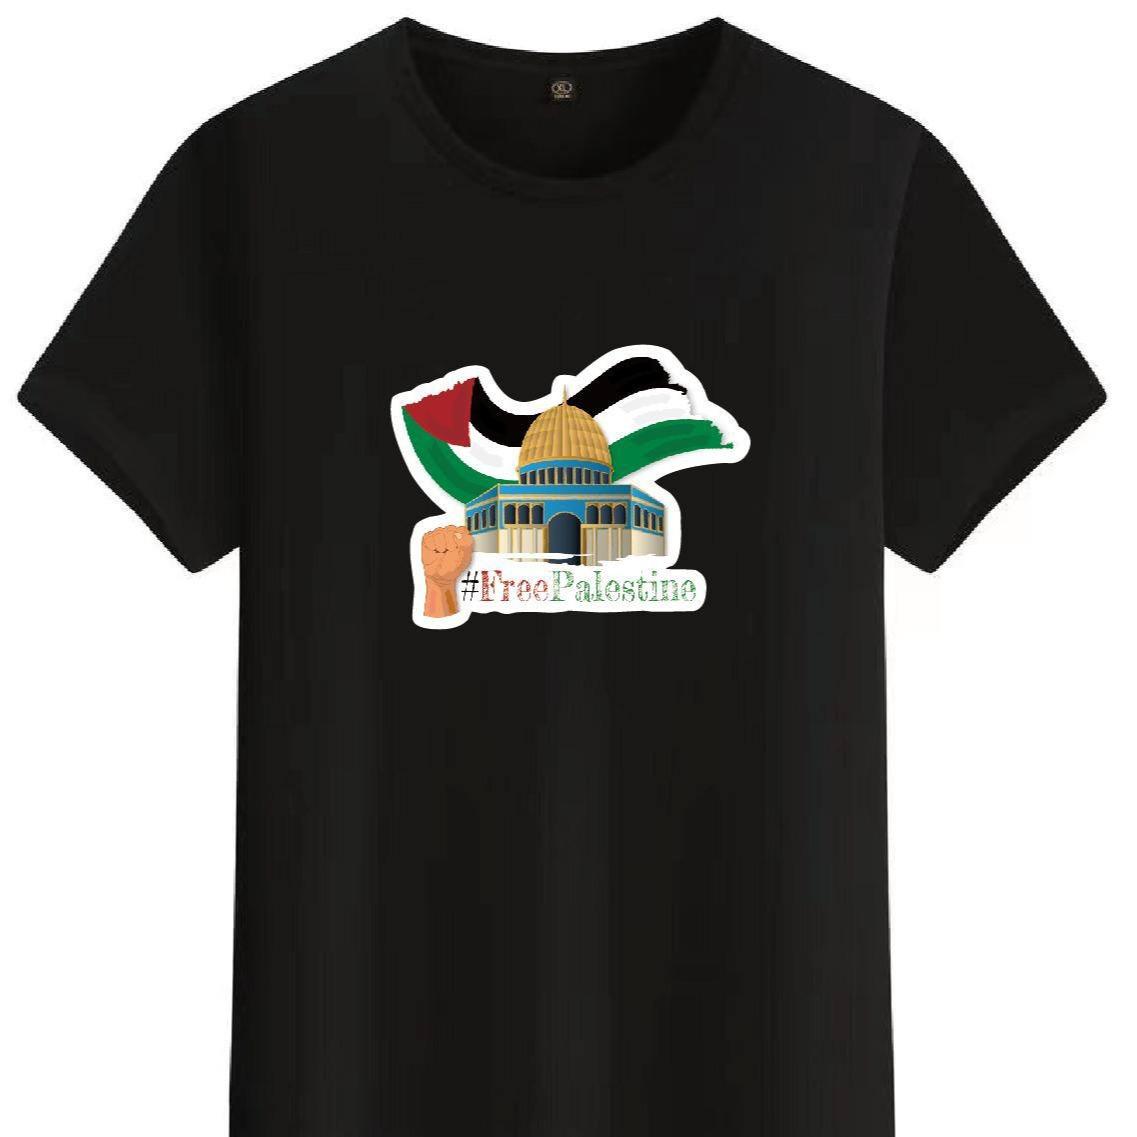 High-Quality AlQuds Shirt: 100% Cotton with Vibrant Print Representing Palestine